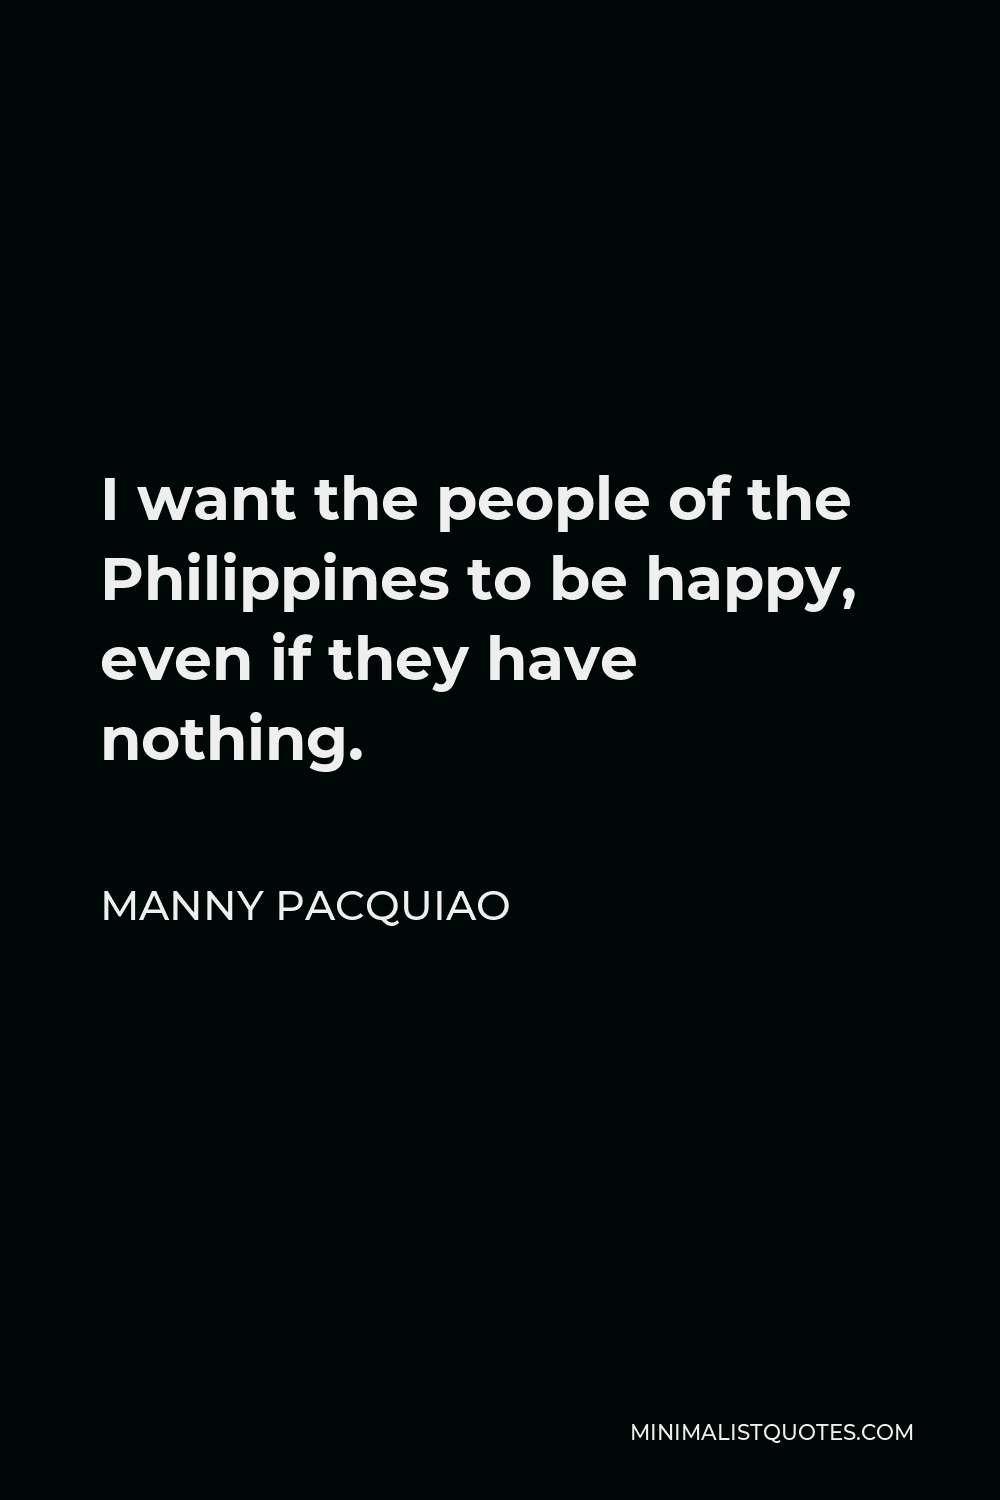 Manny Pacquiao Quote - I want the people of the Philippines to be happy, even if they have nothing.